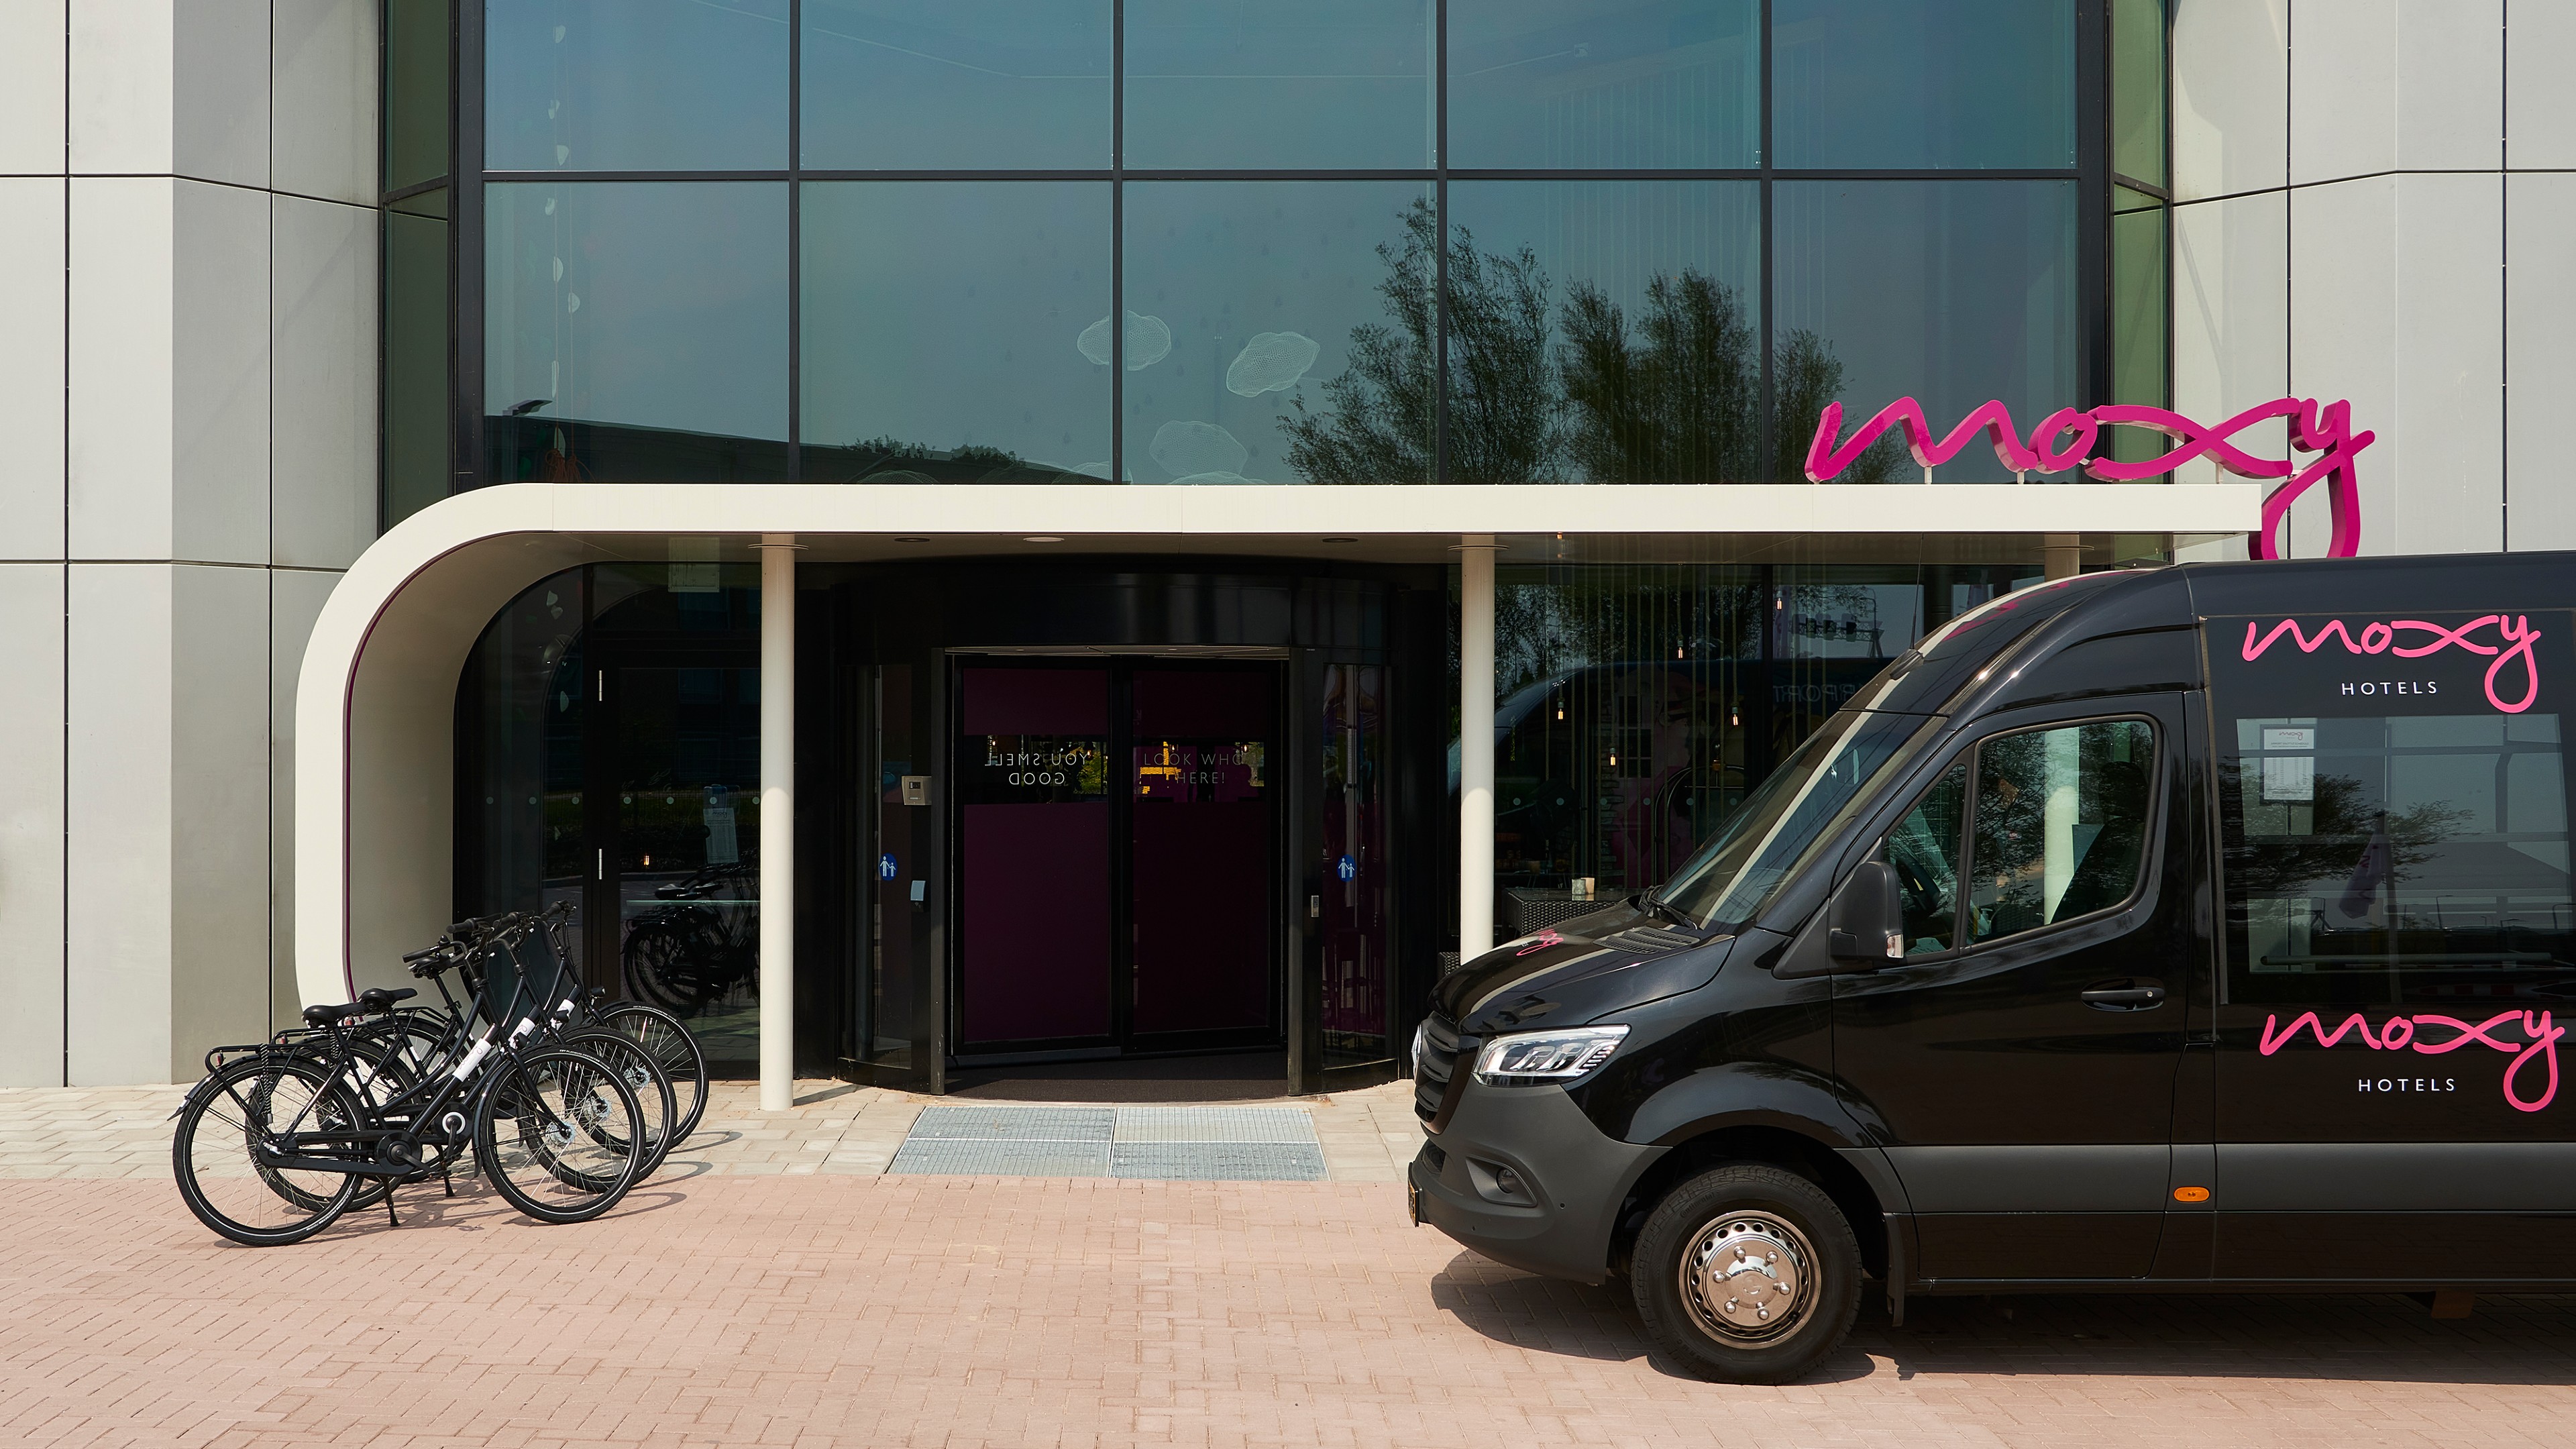 MOXY Schiphol Airport - Park, Sleep & Fly-image 0